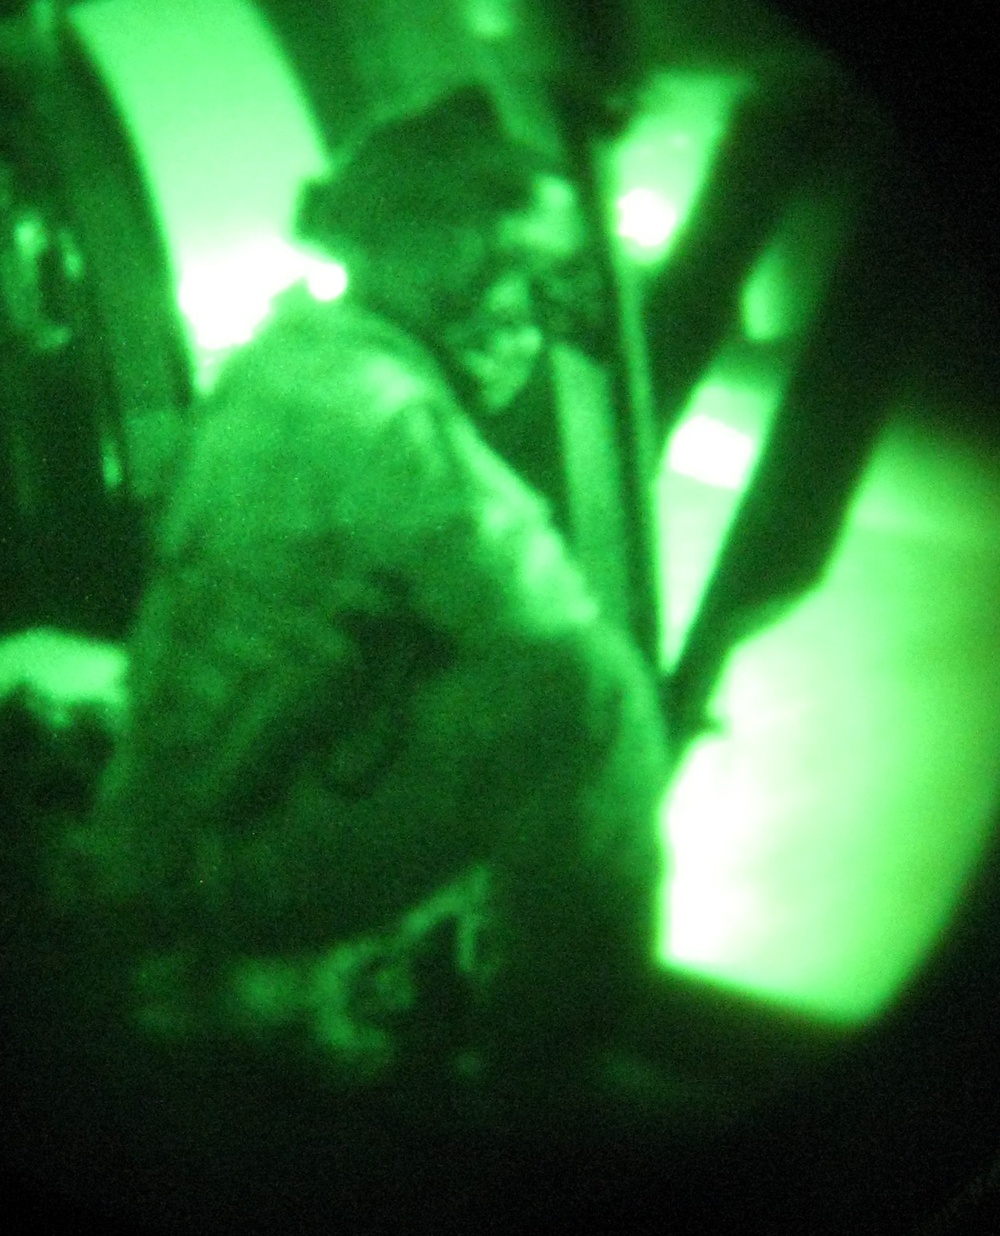 We own the night: JTF-Bravo's helicopters conduct the mission anywhere, anytime